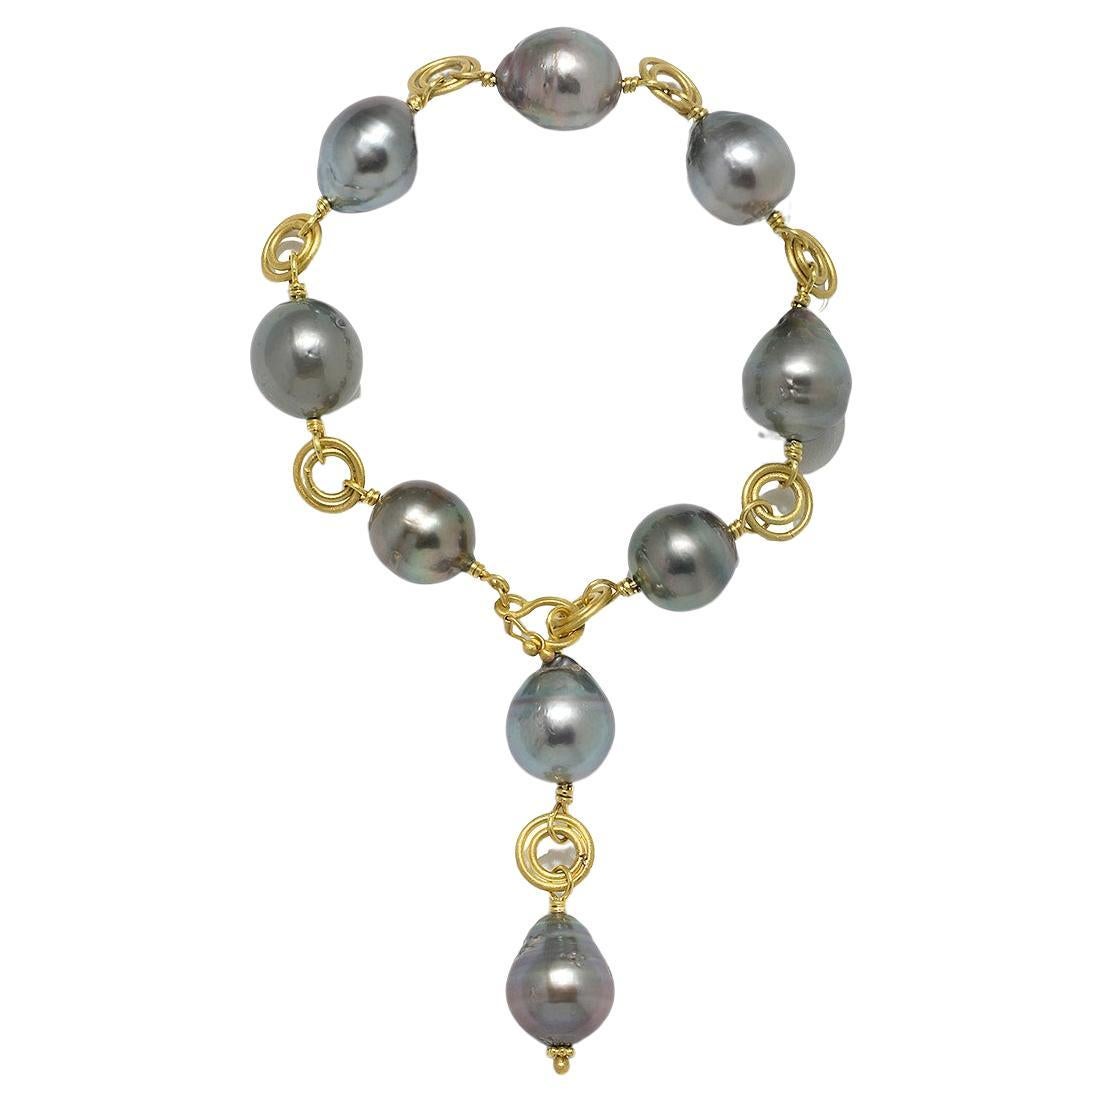 How much are Tahitian black pearls worth?